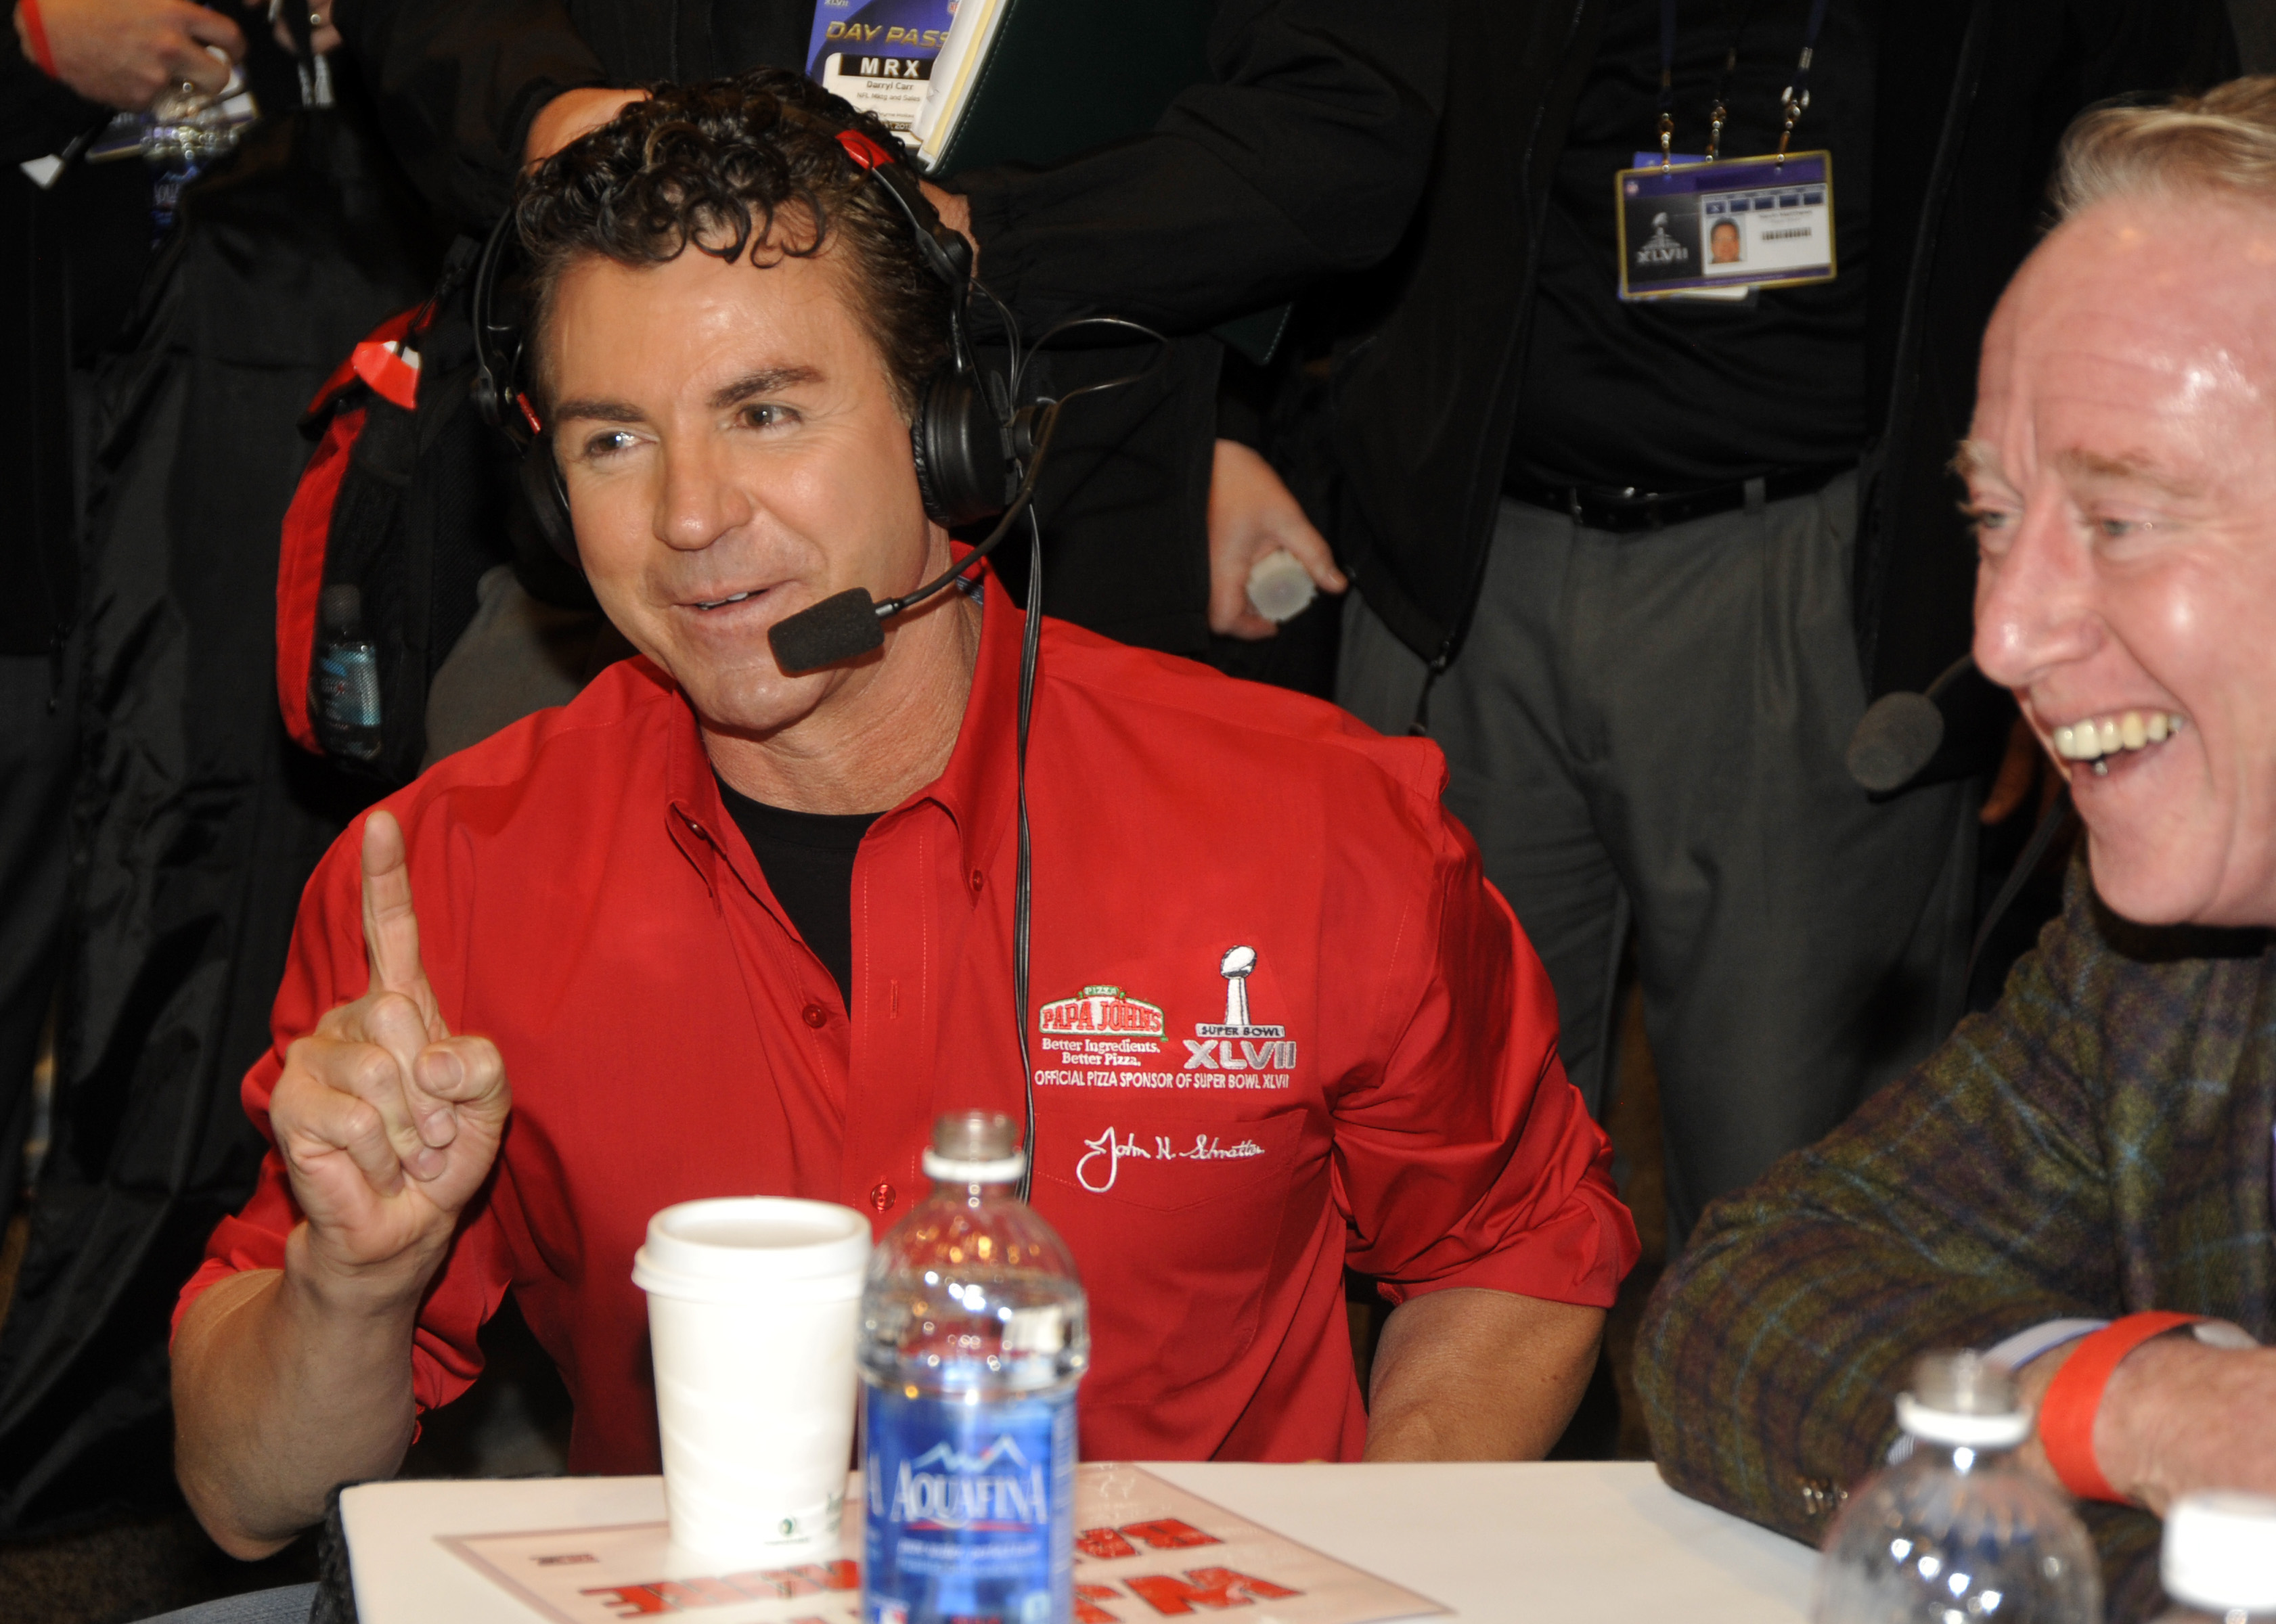 Papa John's Founder, Chairman and CEO John Schnatter, left, and NFL legend Archie Manning, right, share a laugh at the NFL Media Center, promoting Papa John's Super Bowl XLVII Coin Toss Experience, in New Orleans. (Jack Dempsey/Invision/AP/REX/Shutterstock)